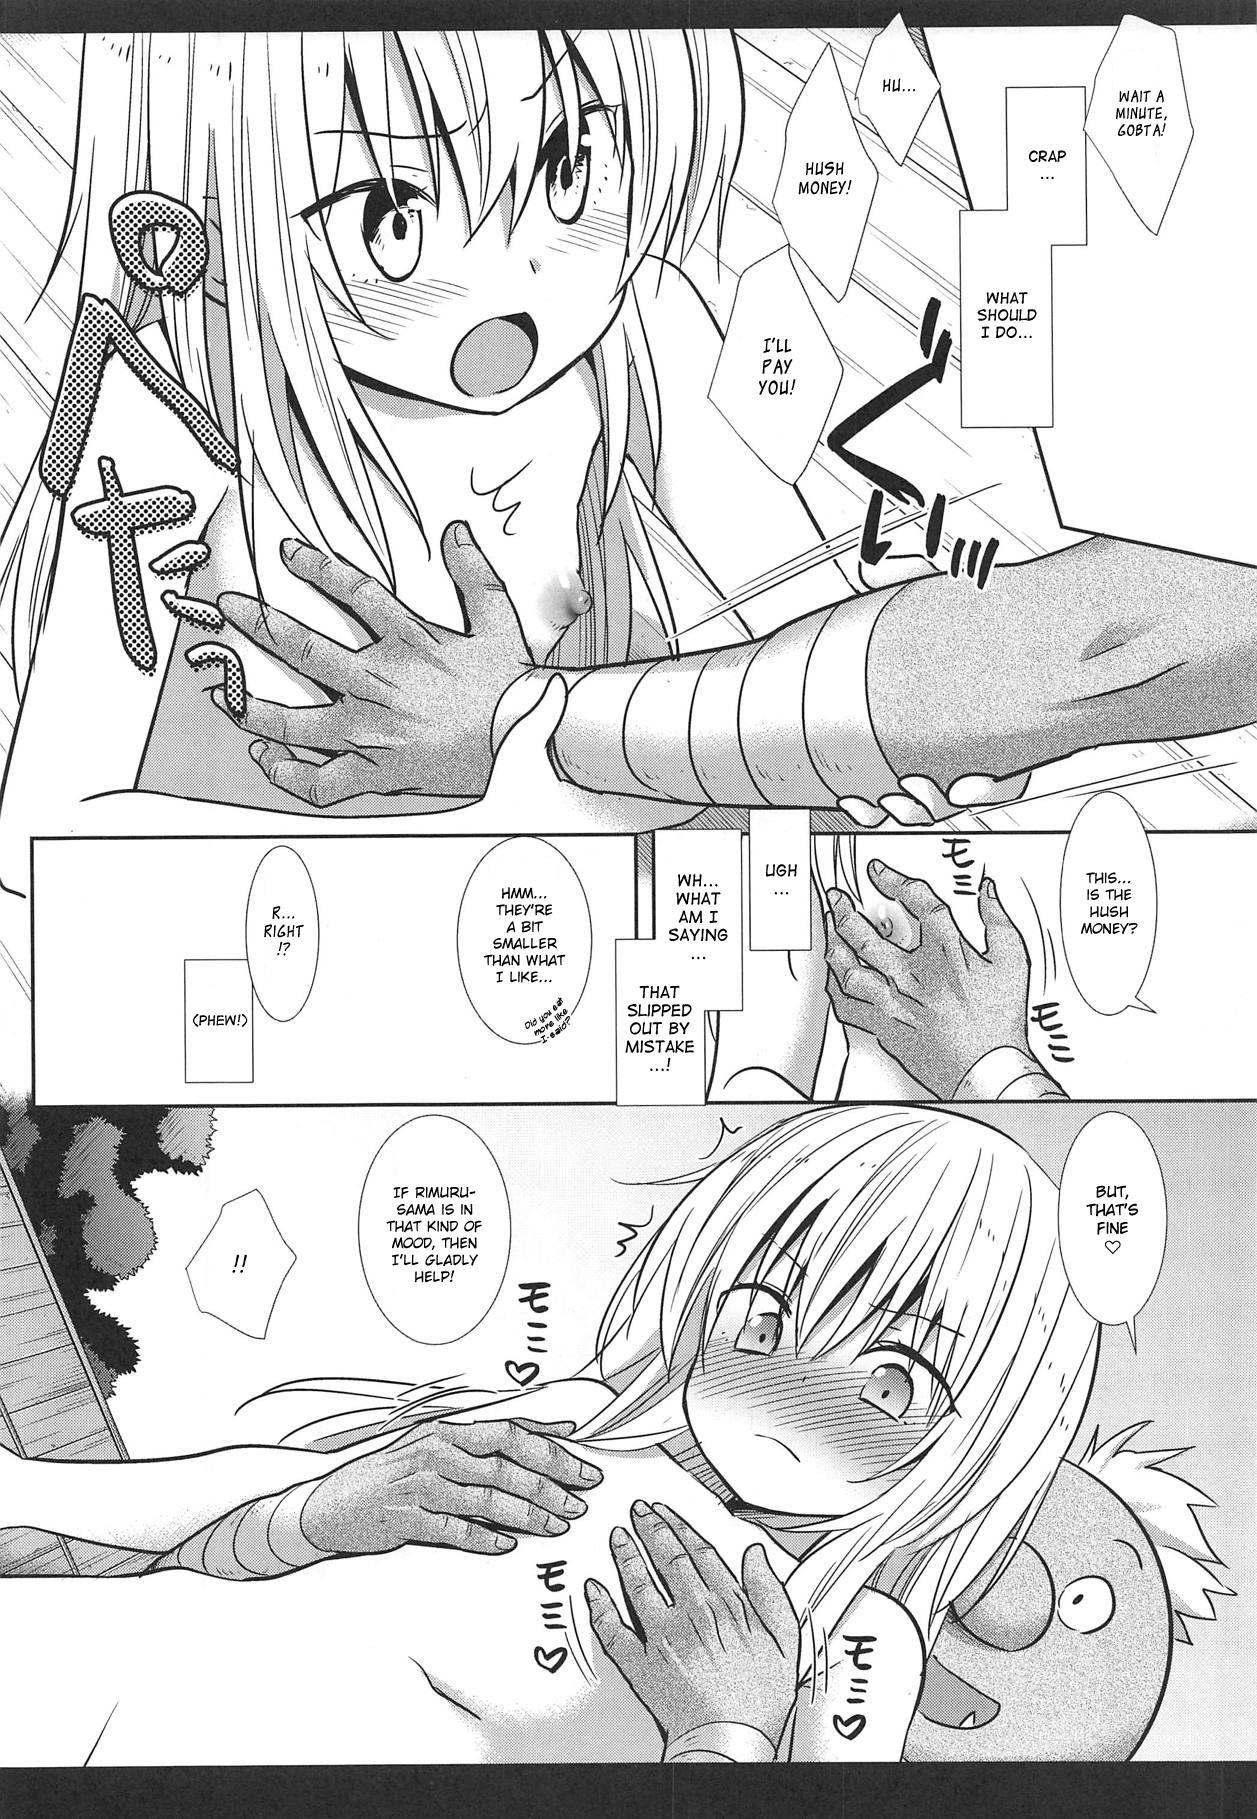 Hot Chicks Fucking That Time I Got Reincarnated in a Thin Book! "Even though I was a nearly 40 year old man, I still came like a girl..." - Tensei shitara slime datta ken Dick Suckers - Page 9